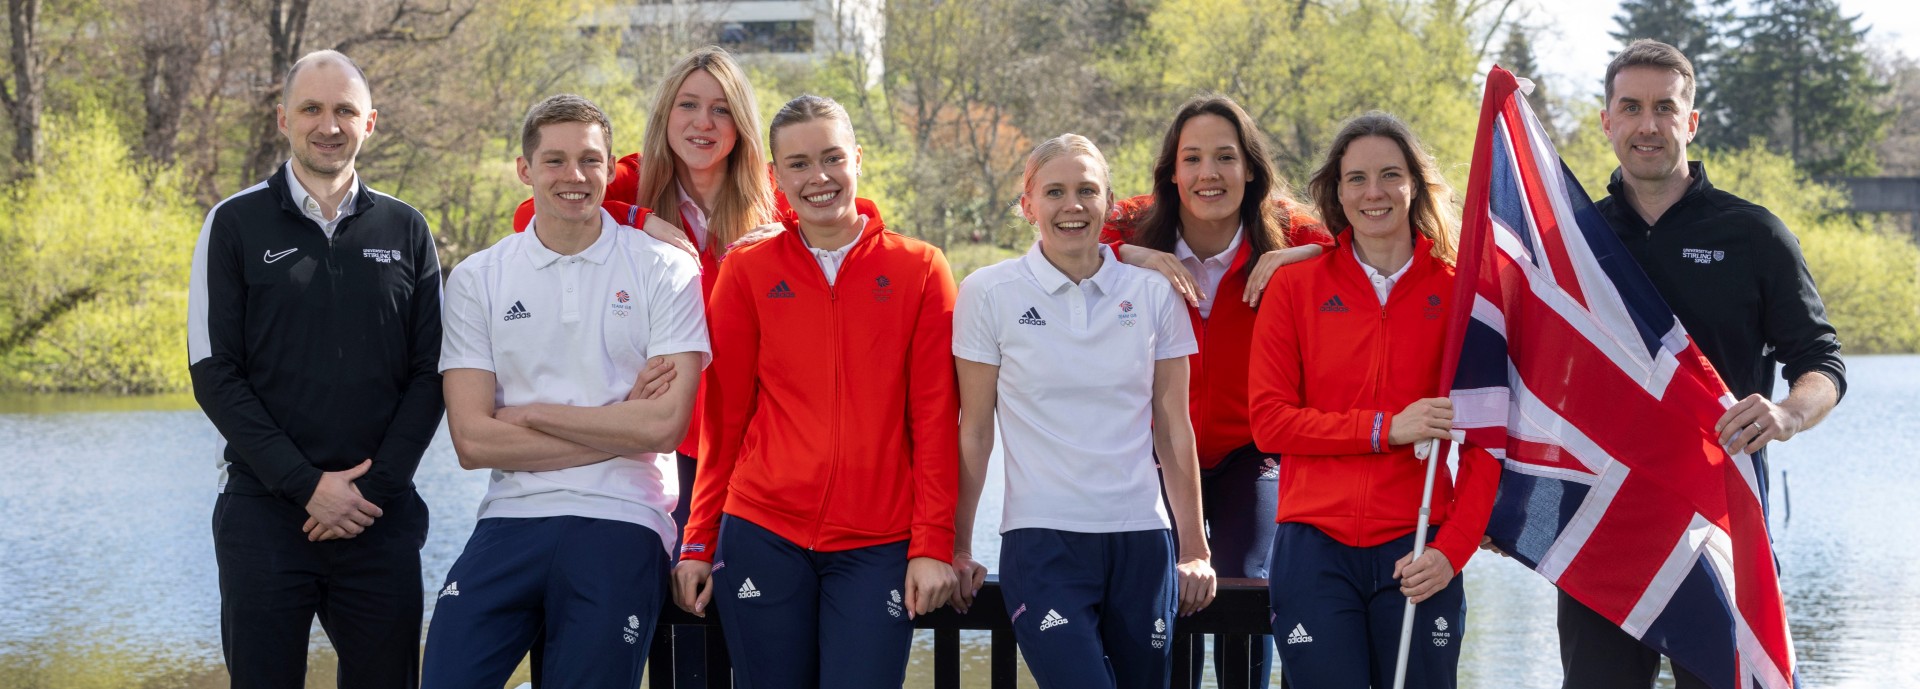 (l-r, front row) David Bond, Head of Performance Sport at the University of Stirling, Duncan Scott, Katie Shanahan, Lucy Hope, Kathleen Dawson, (l-r, back row) Keanna Macinnes, Angharad Evans, and Steve Tigg, Head Performance Swim Coach at the University of Stirling